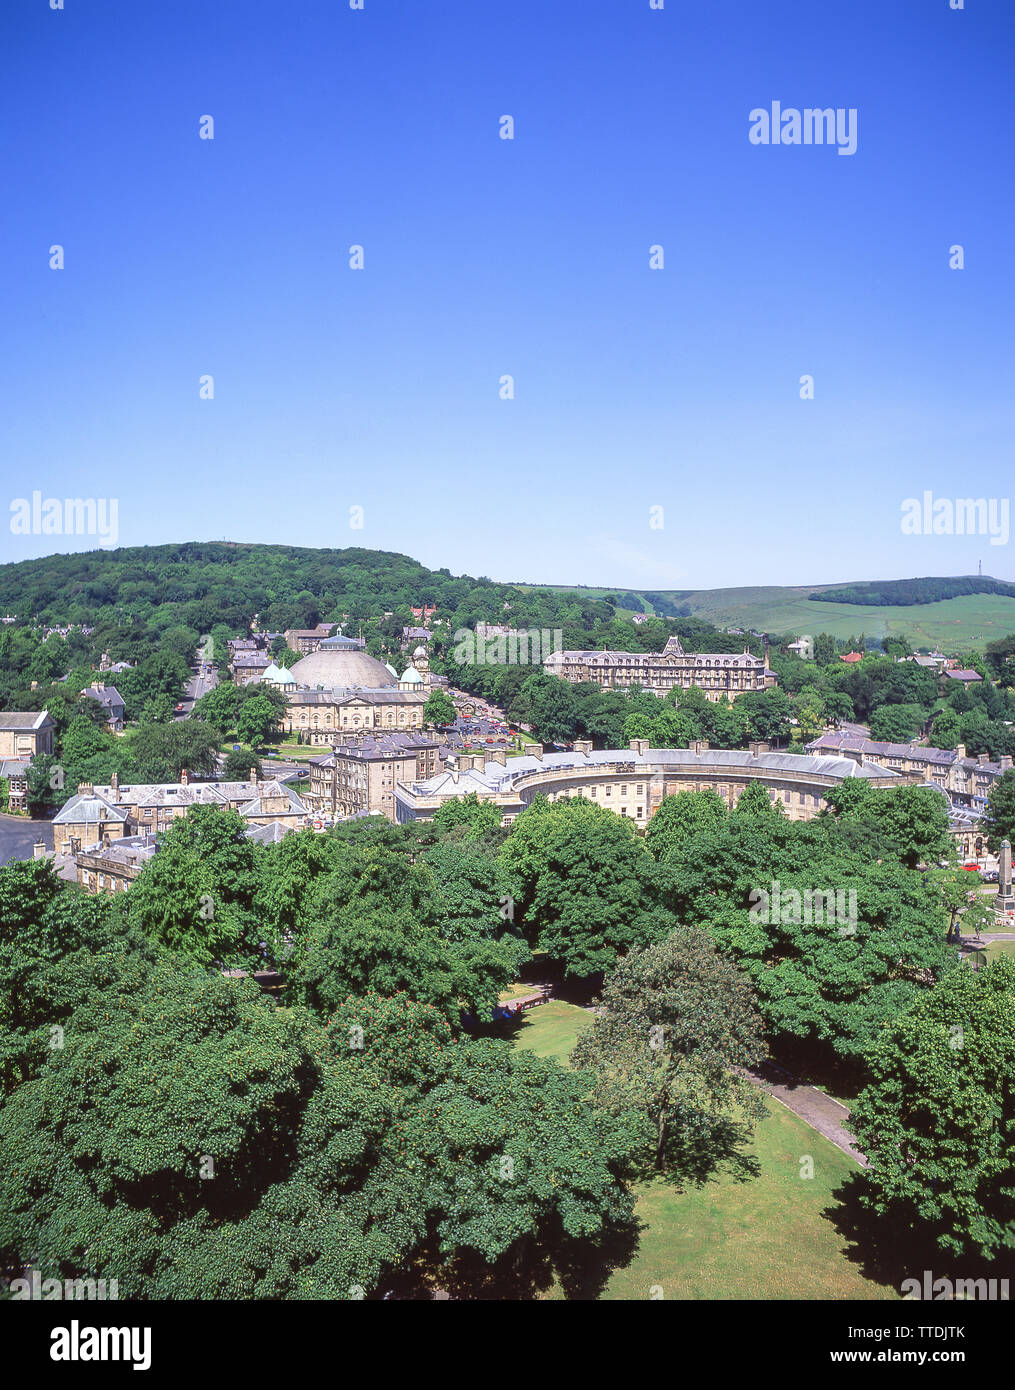 Aerial view of town showing Devonshire Dome and Buxton Crescent, Buxton, Derbyshire, England, United Kingdom Stock Photo